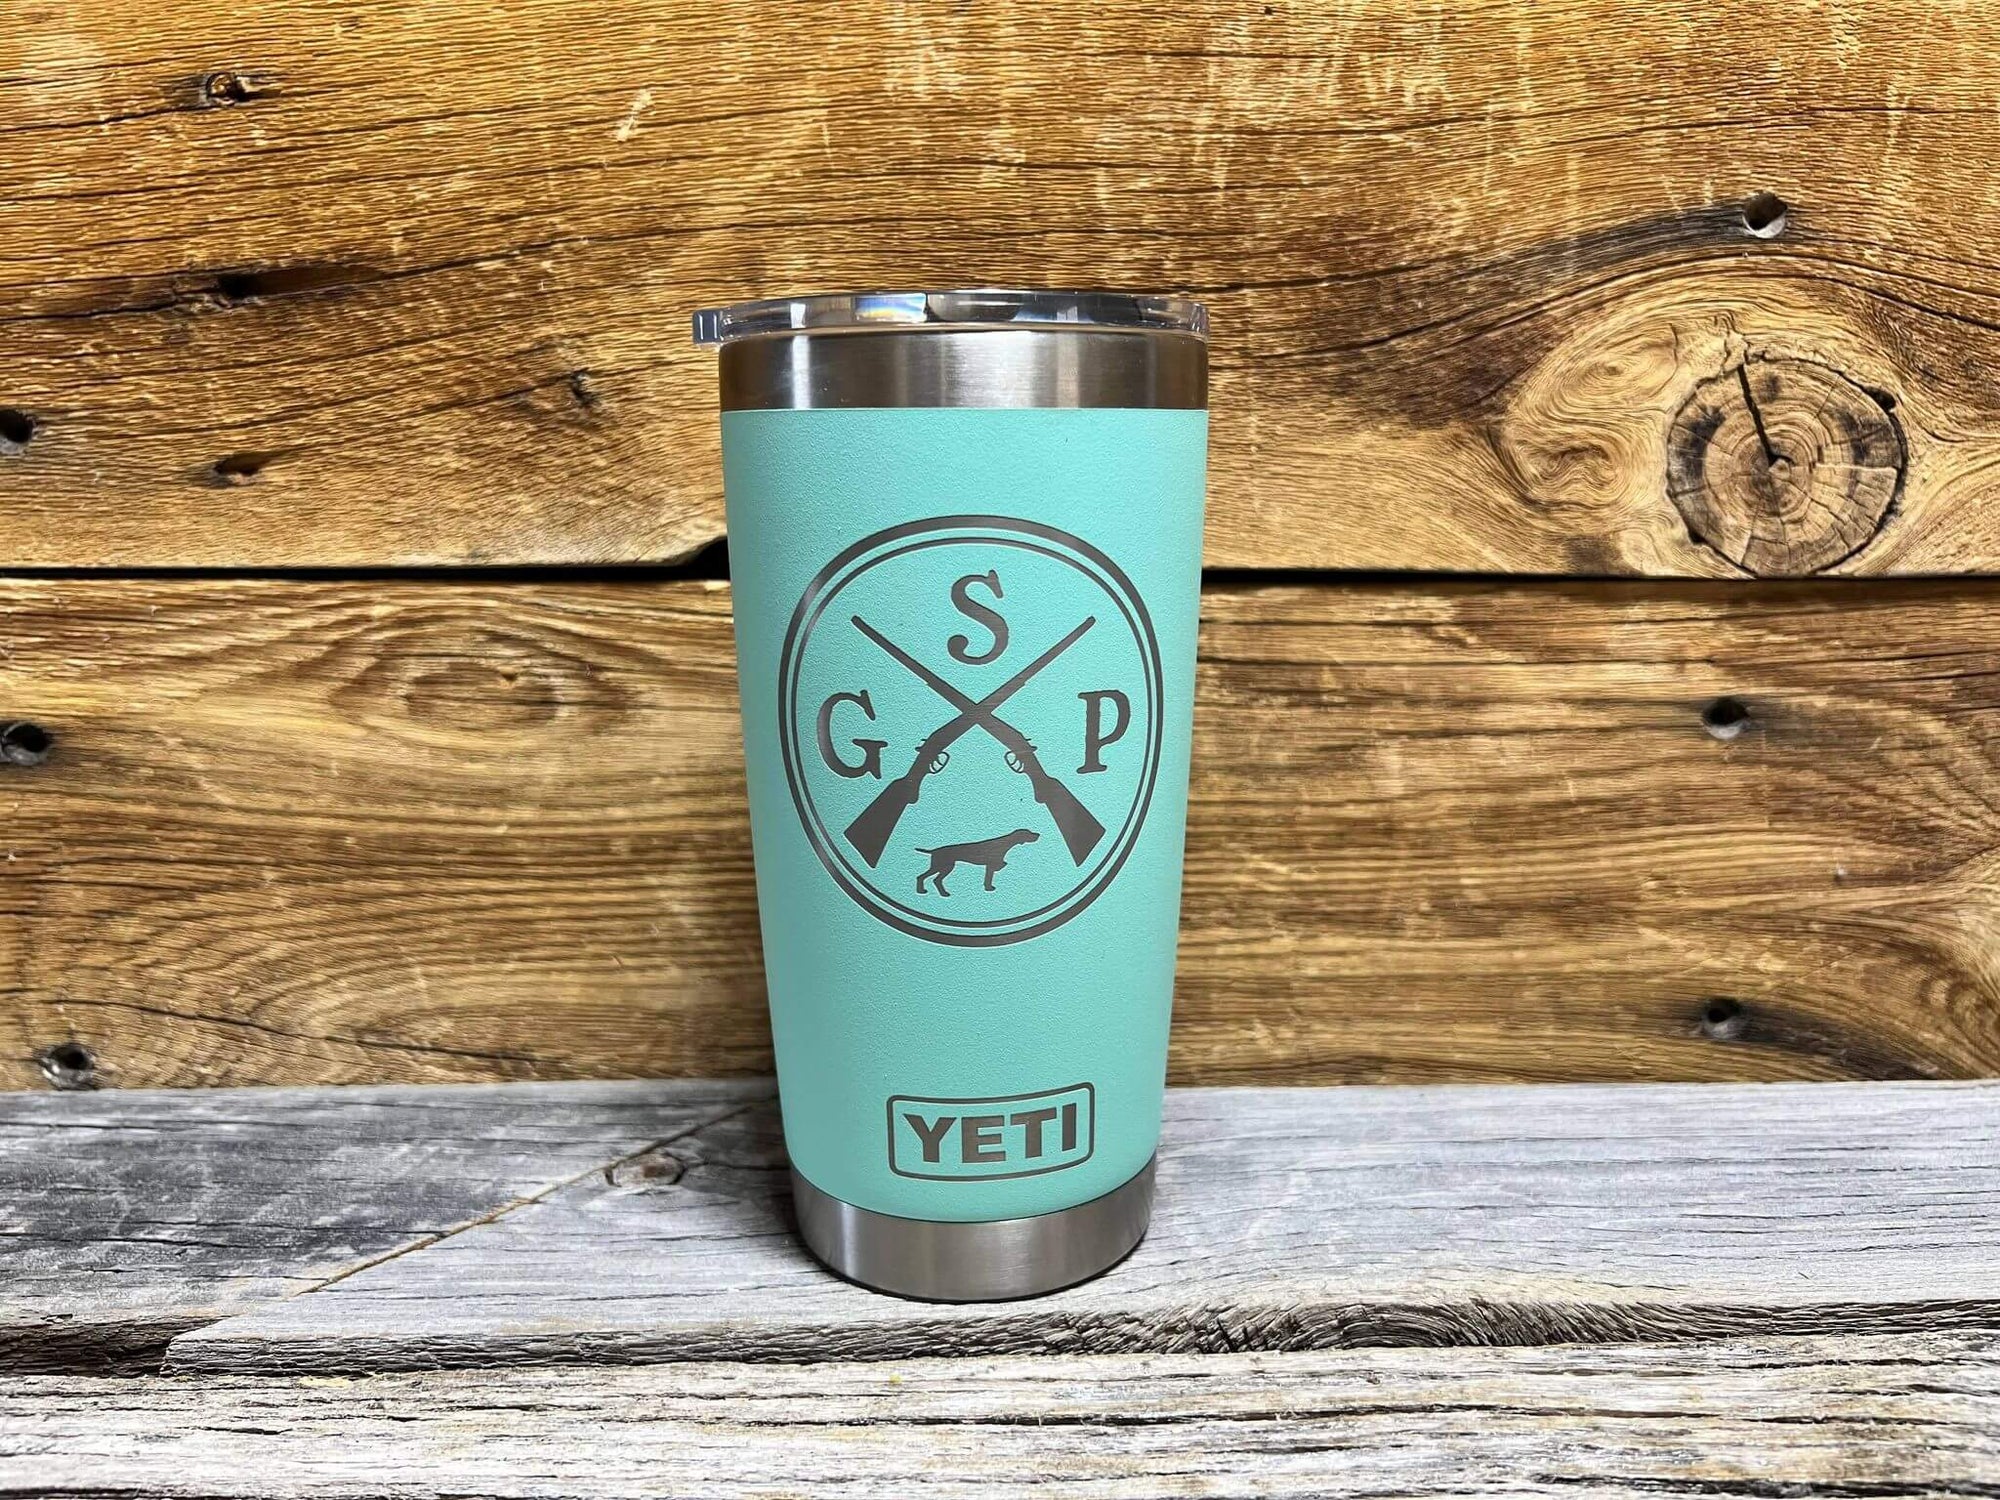 German shorthaired pointer (GSP) laser engraved artwork - silver on sea foam Yeti Rambler tumbler on wood table with wood background